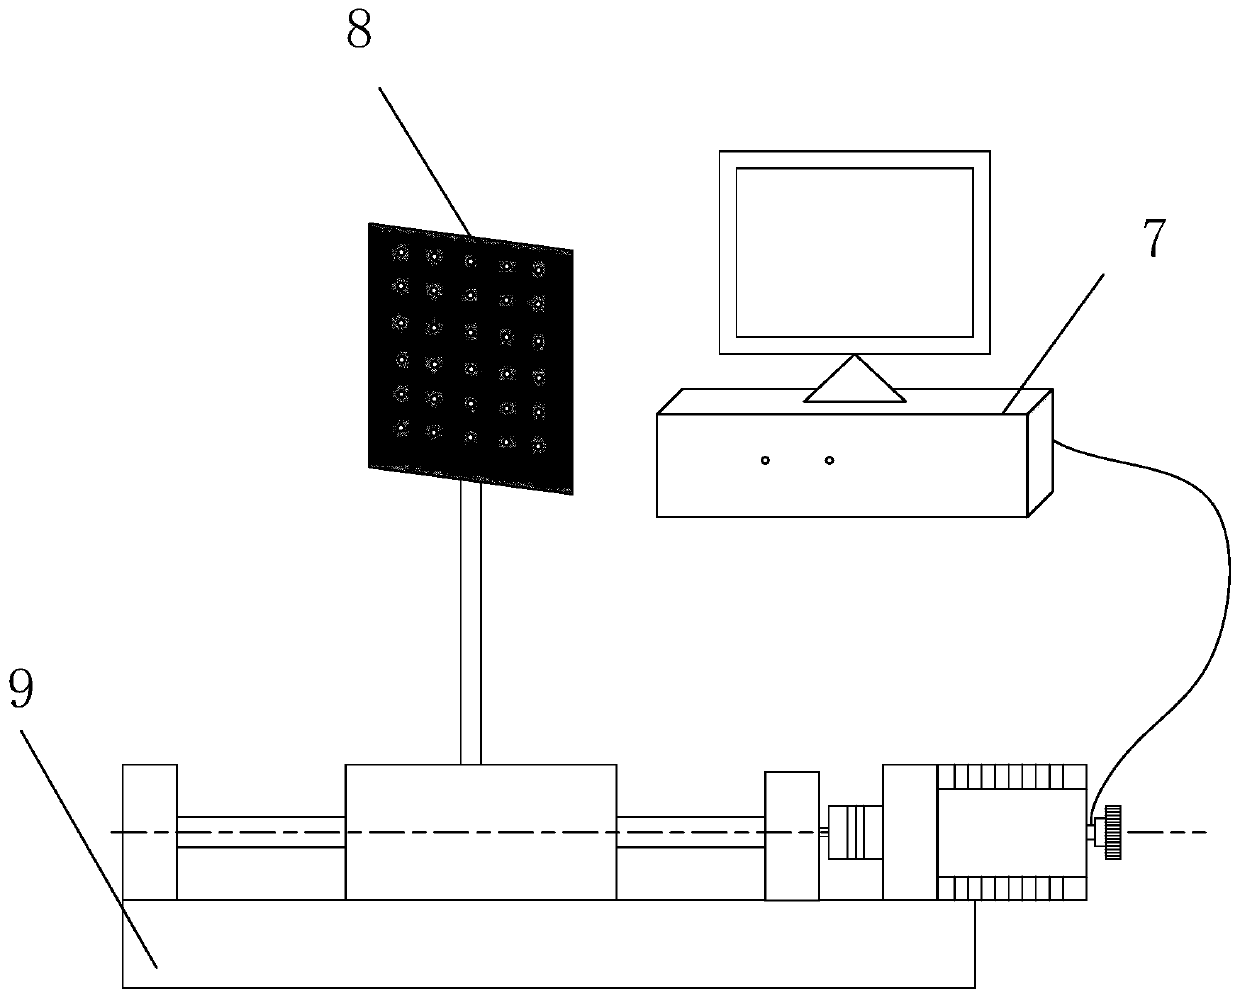 3d-3c Particle Image Velocimetry System and Method Based on Integrated Imaging Technology